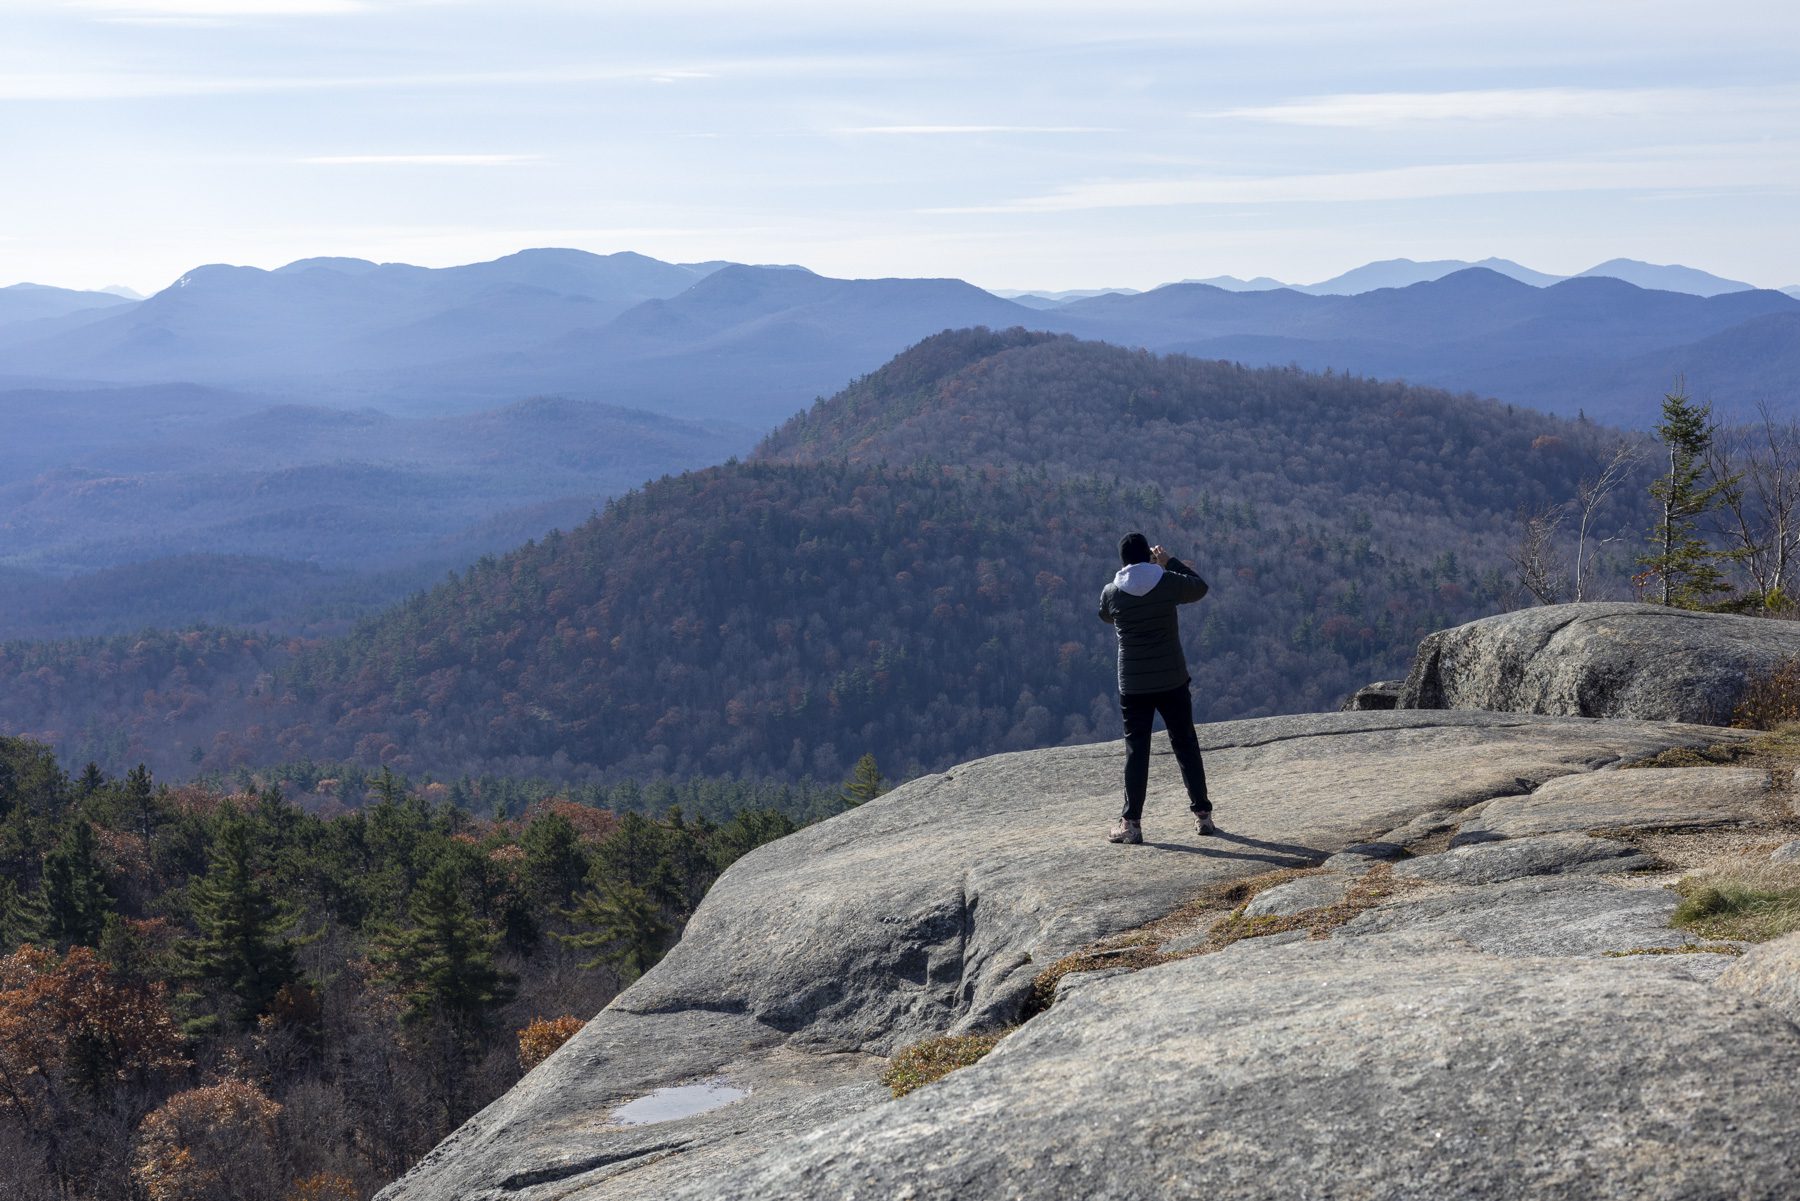 A hiker takes a photo from atop Poke-O-Moonshine Mountain. Photo by Mike Lynch